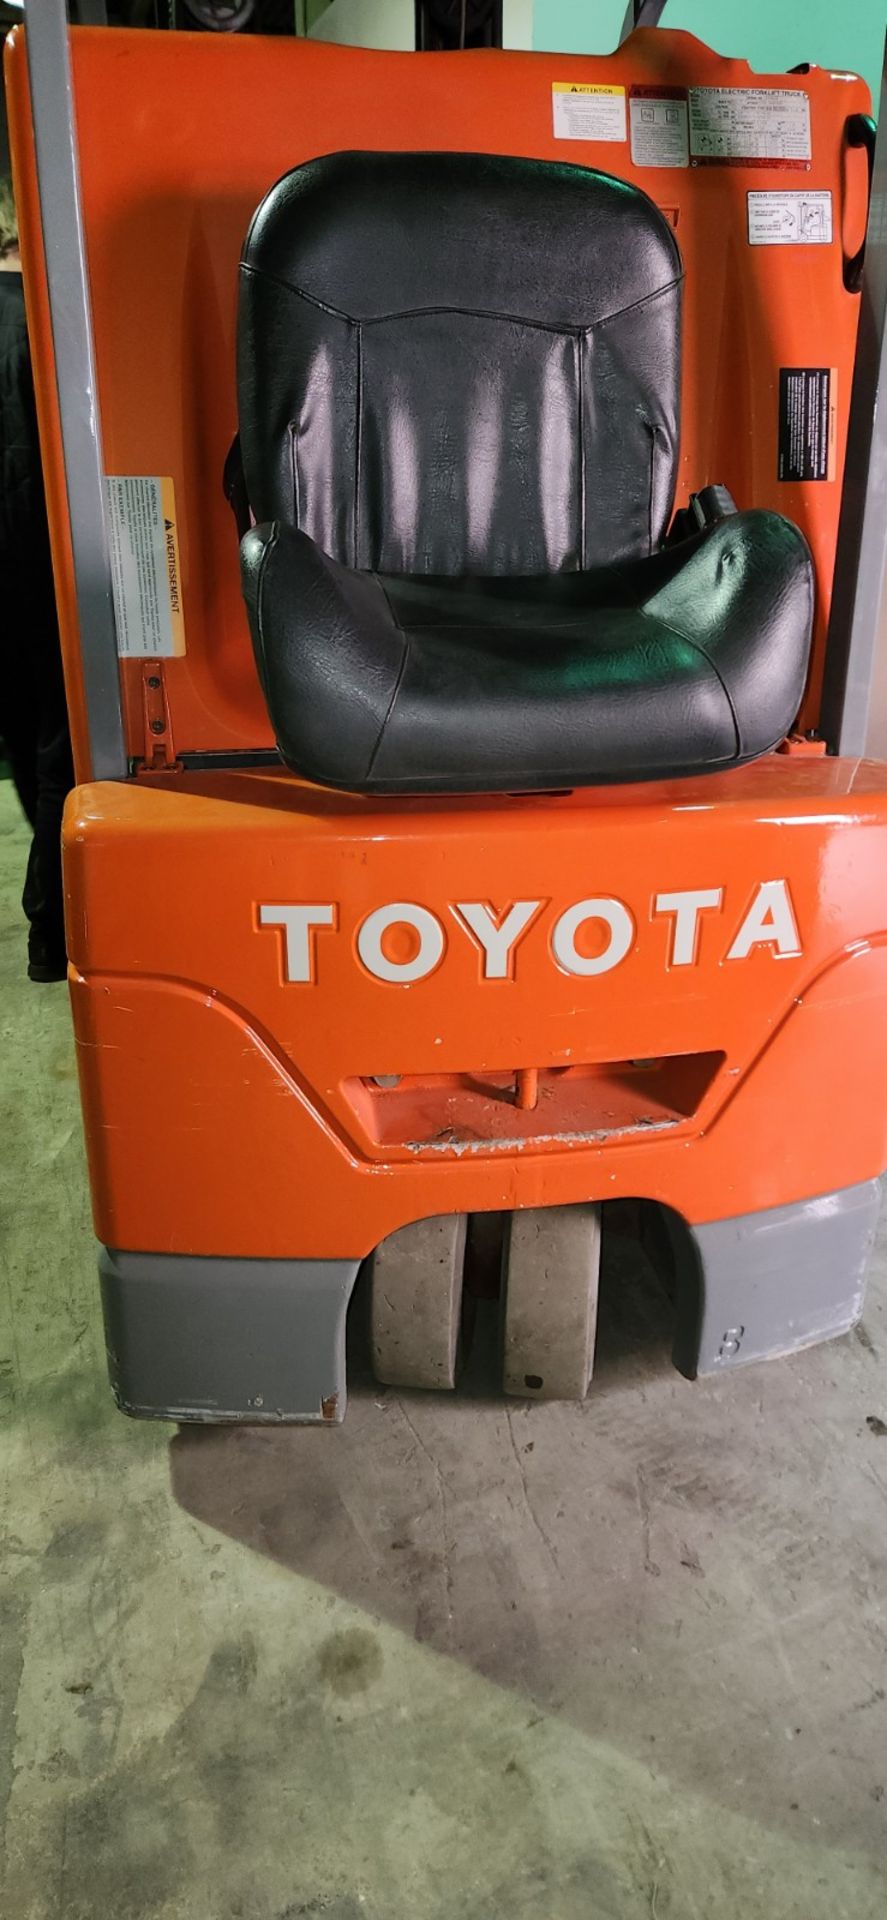 TOYOTA 7FBEU18 ELECTRIC FORKLIFT, S/N 15433, 2,900LB CAP., 189" MAX LIFT, 3-STAGE MAST, SIDE - Image 3 of 14